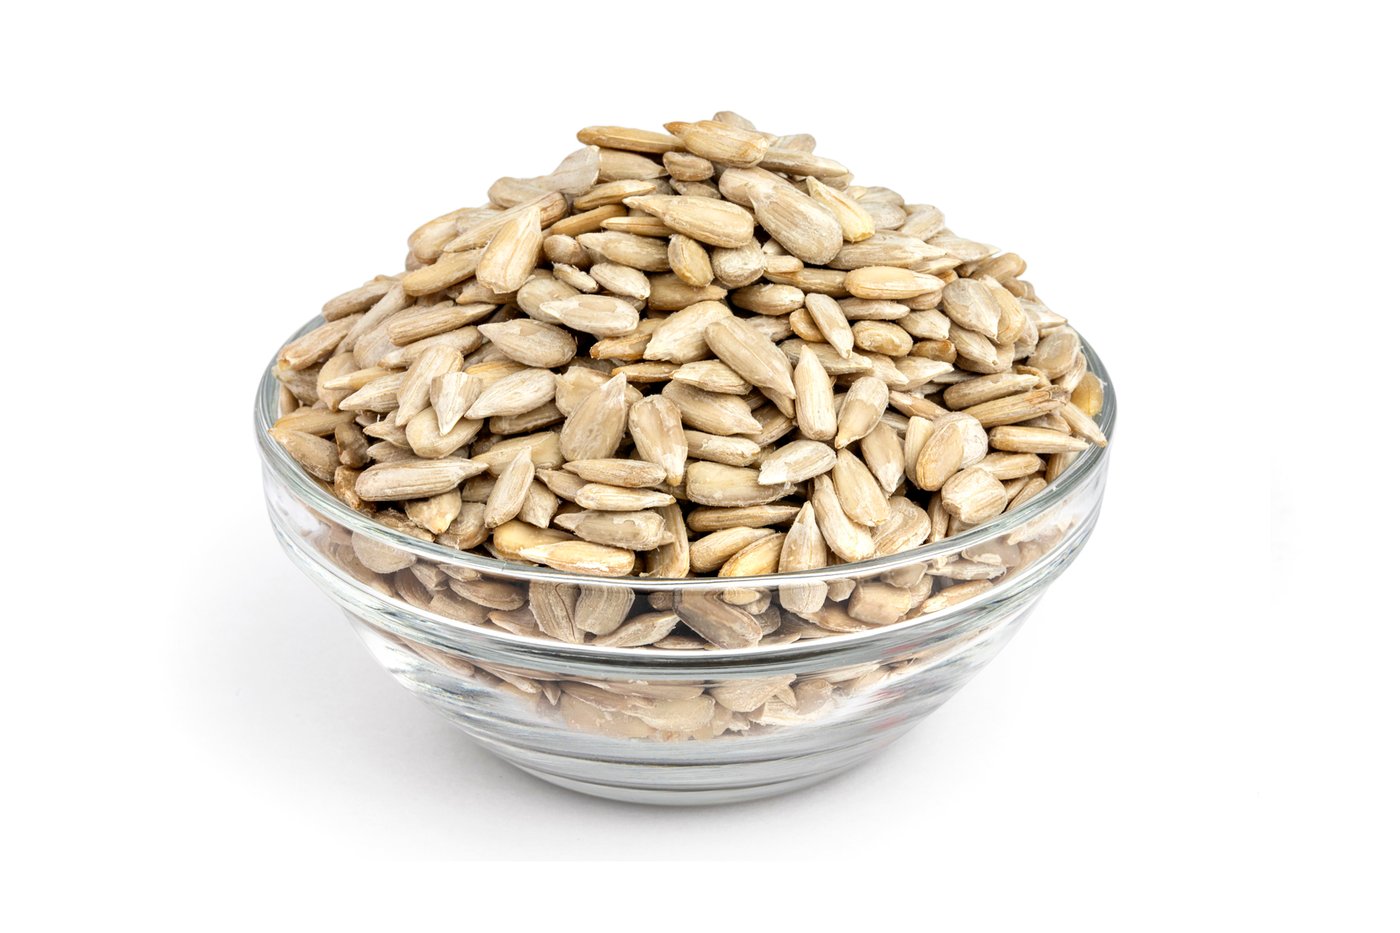 Roasted Sunflower Seeds (Unsalted, No Shell) image zoom